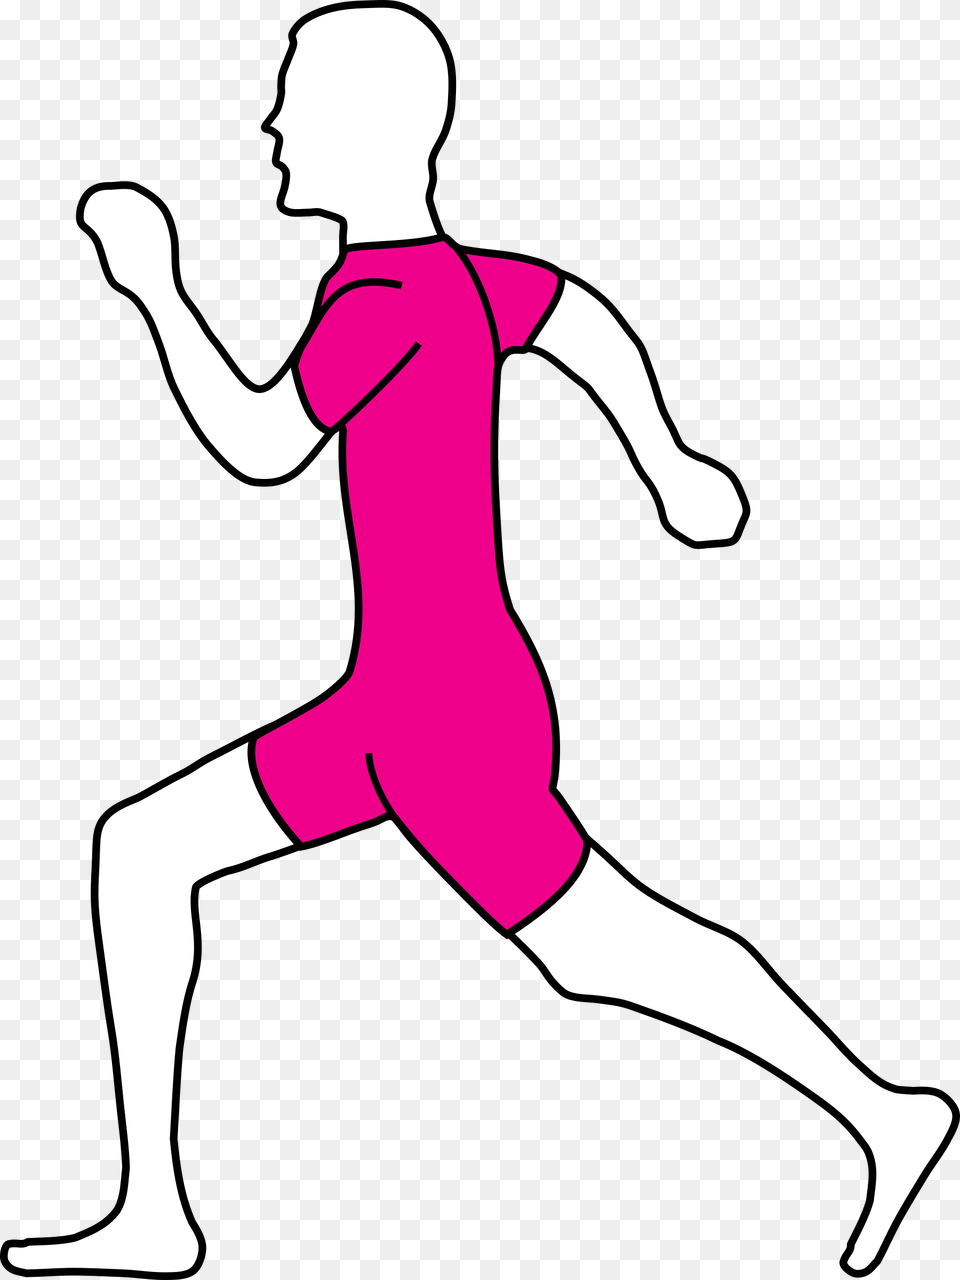 Running Man Clip Art Vector Clip Art Online Draw A People Running, Person, Dancing, Leisure Activities, Purple Png Image